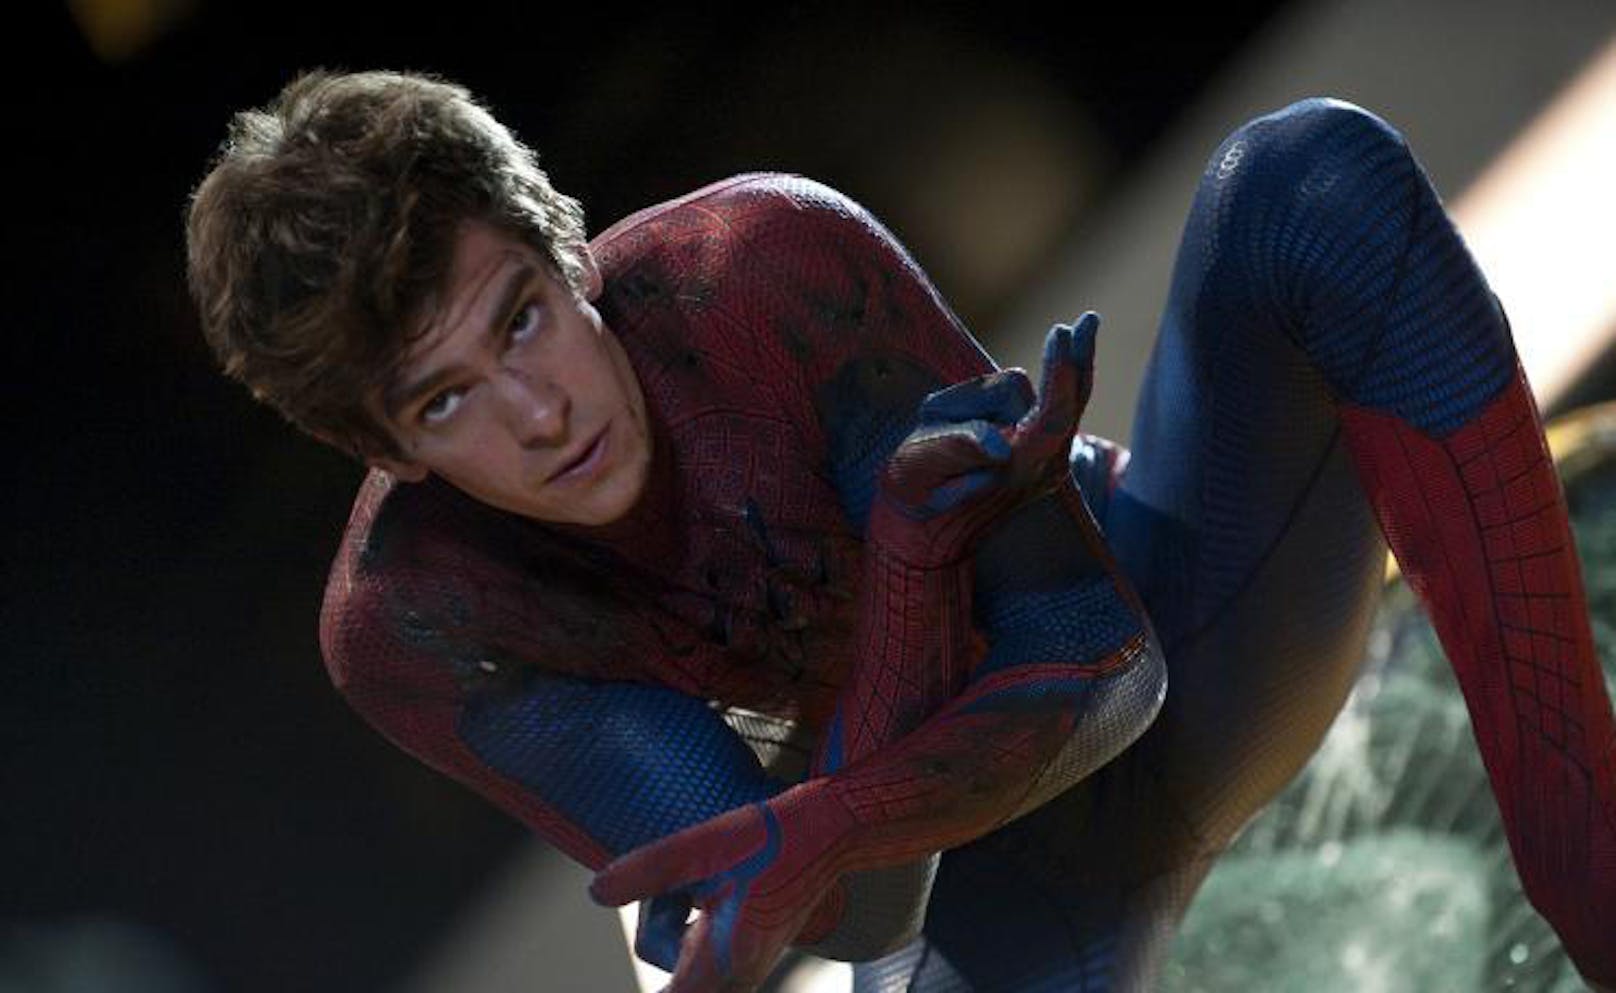 Andrew Garfield in "The Amazing Spider-Man"